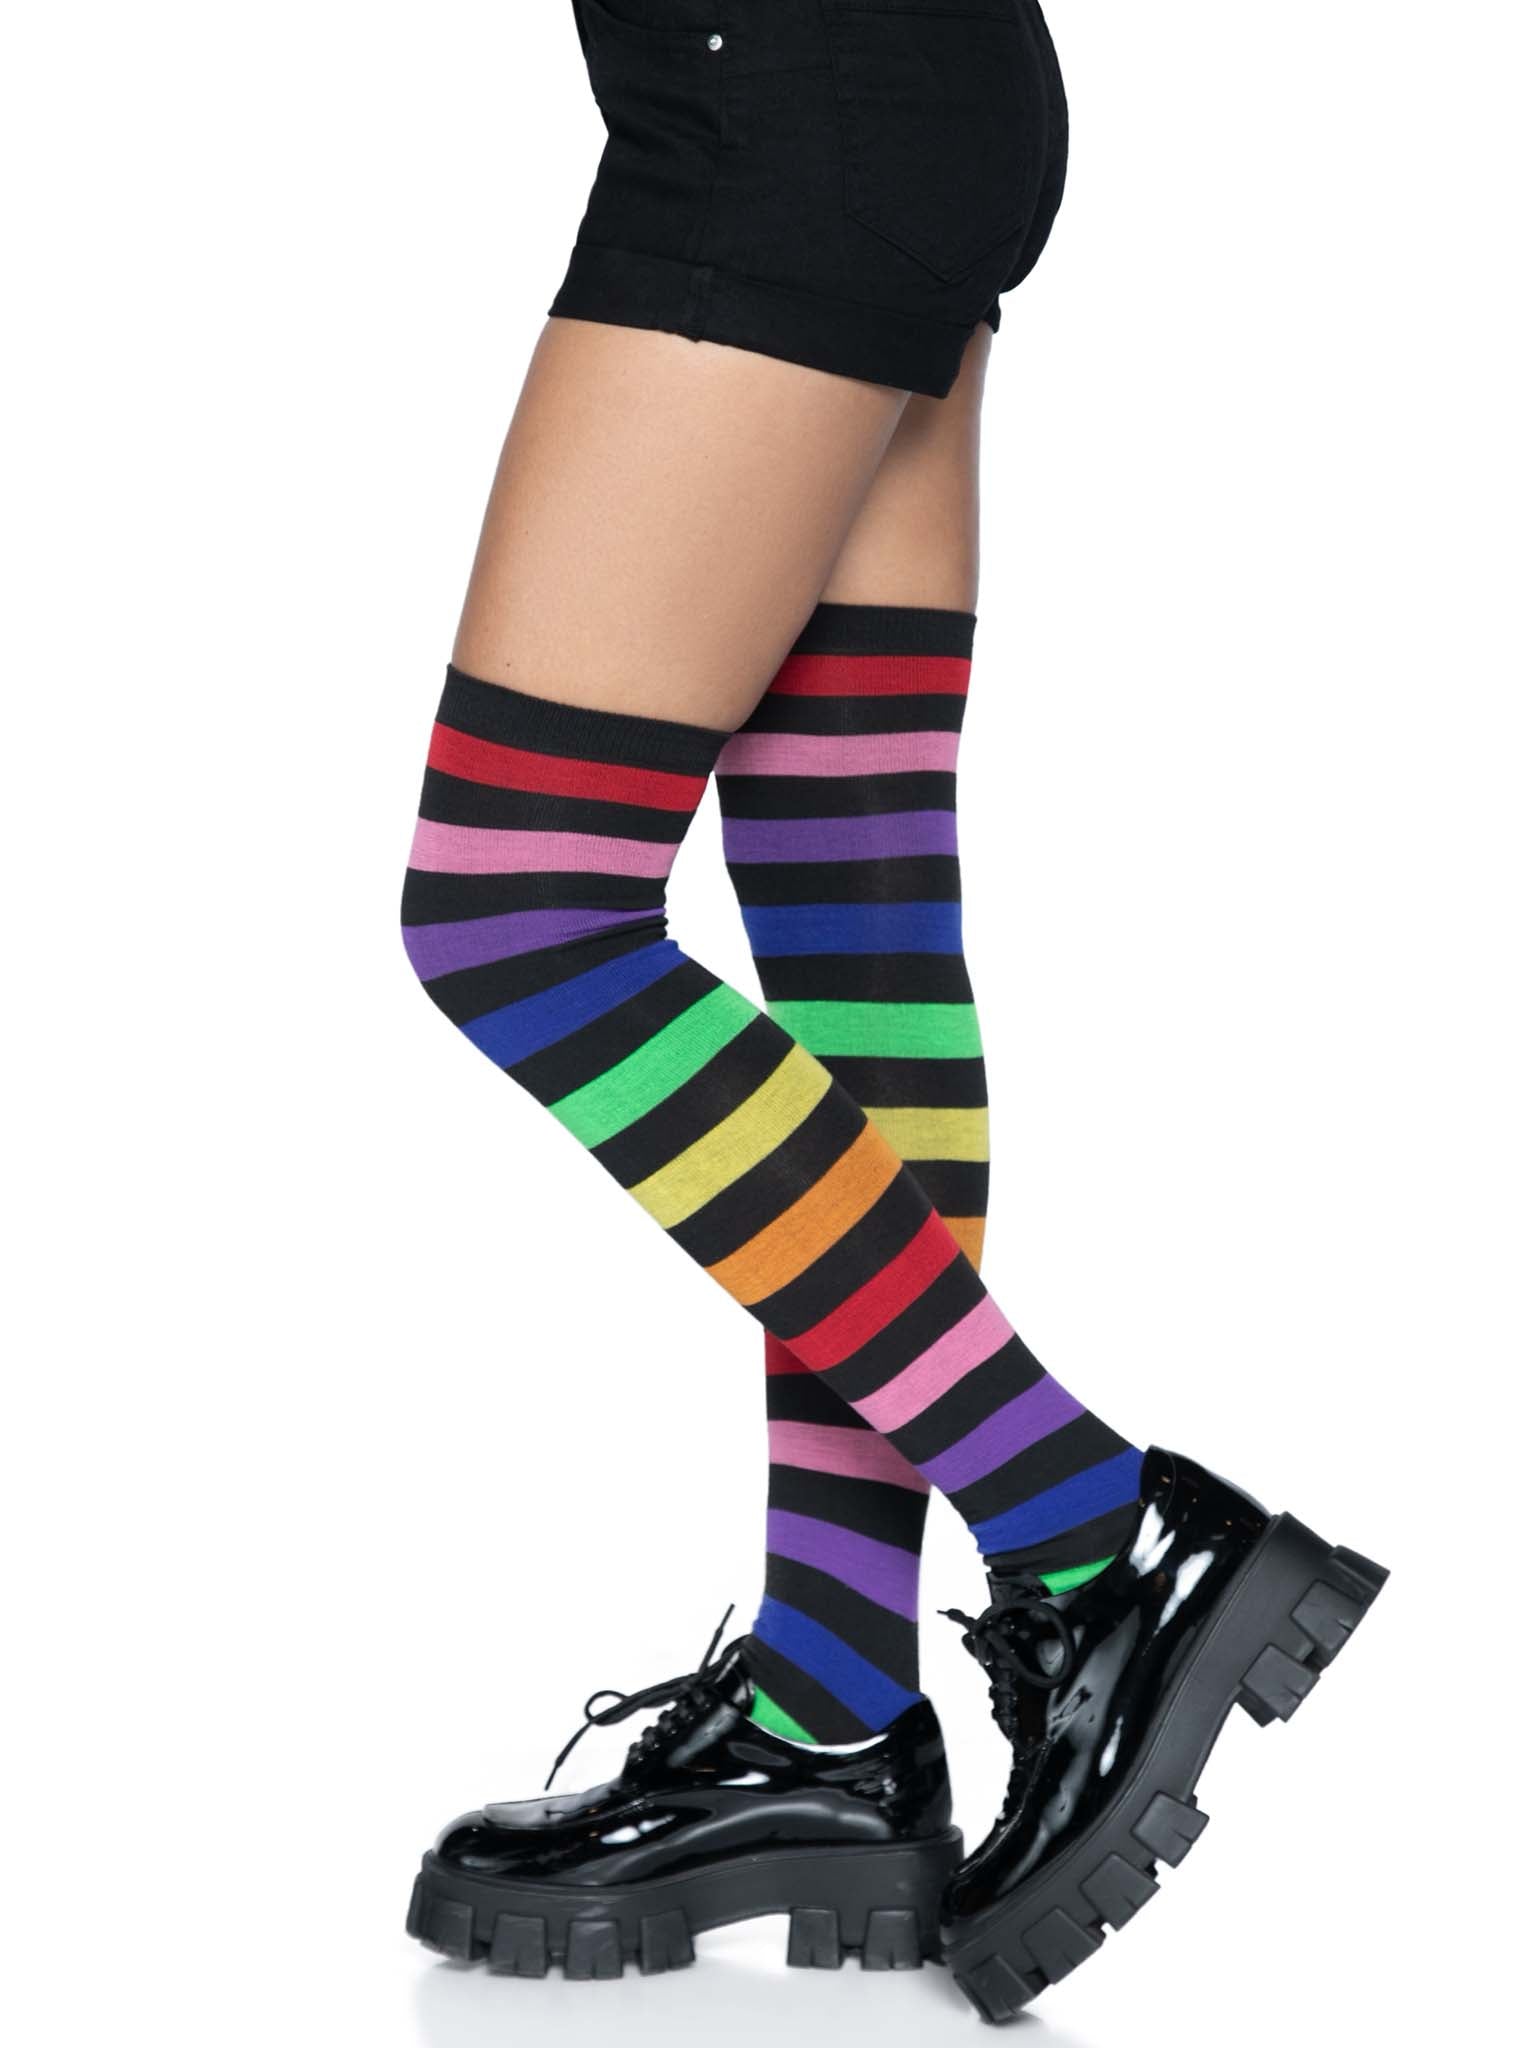 Aurora Rainbow Over The Knee Rainbow Socks on model wearing black shoes and shorts, left side view.